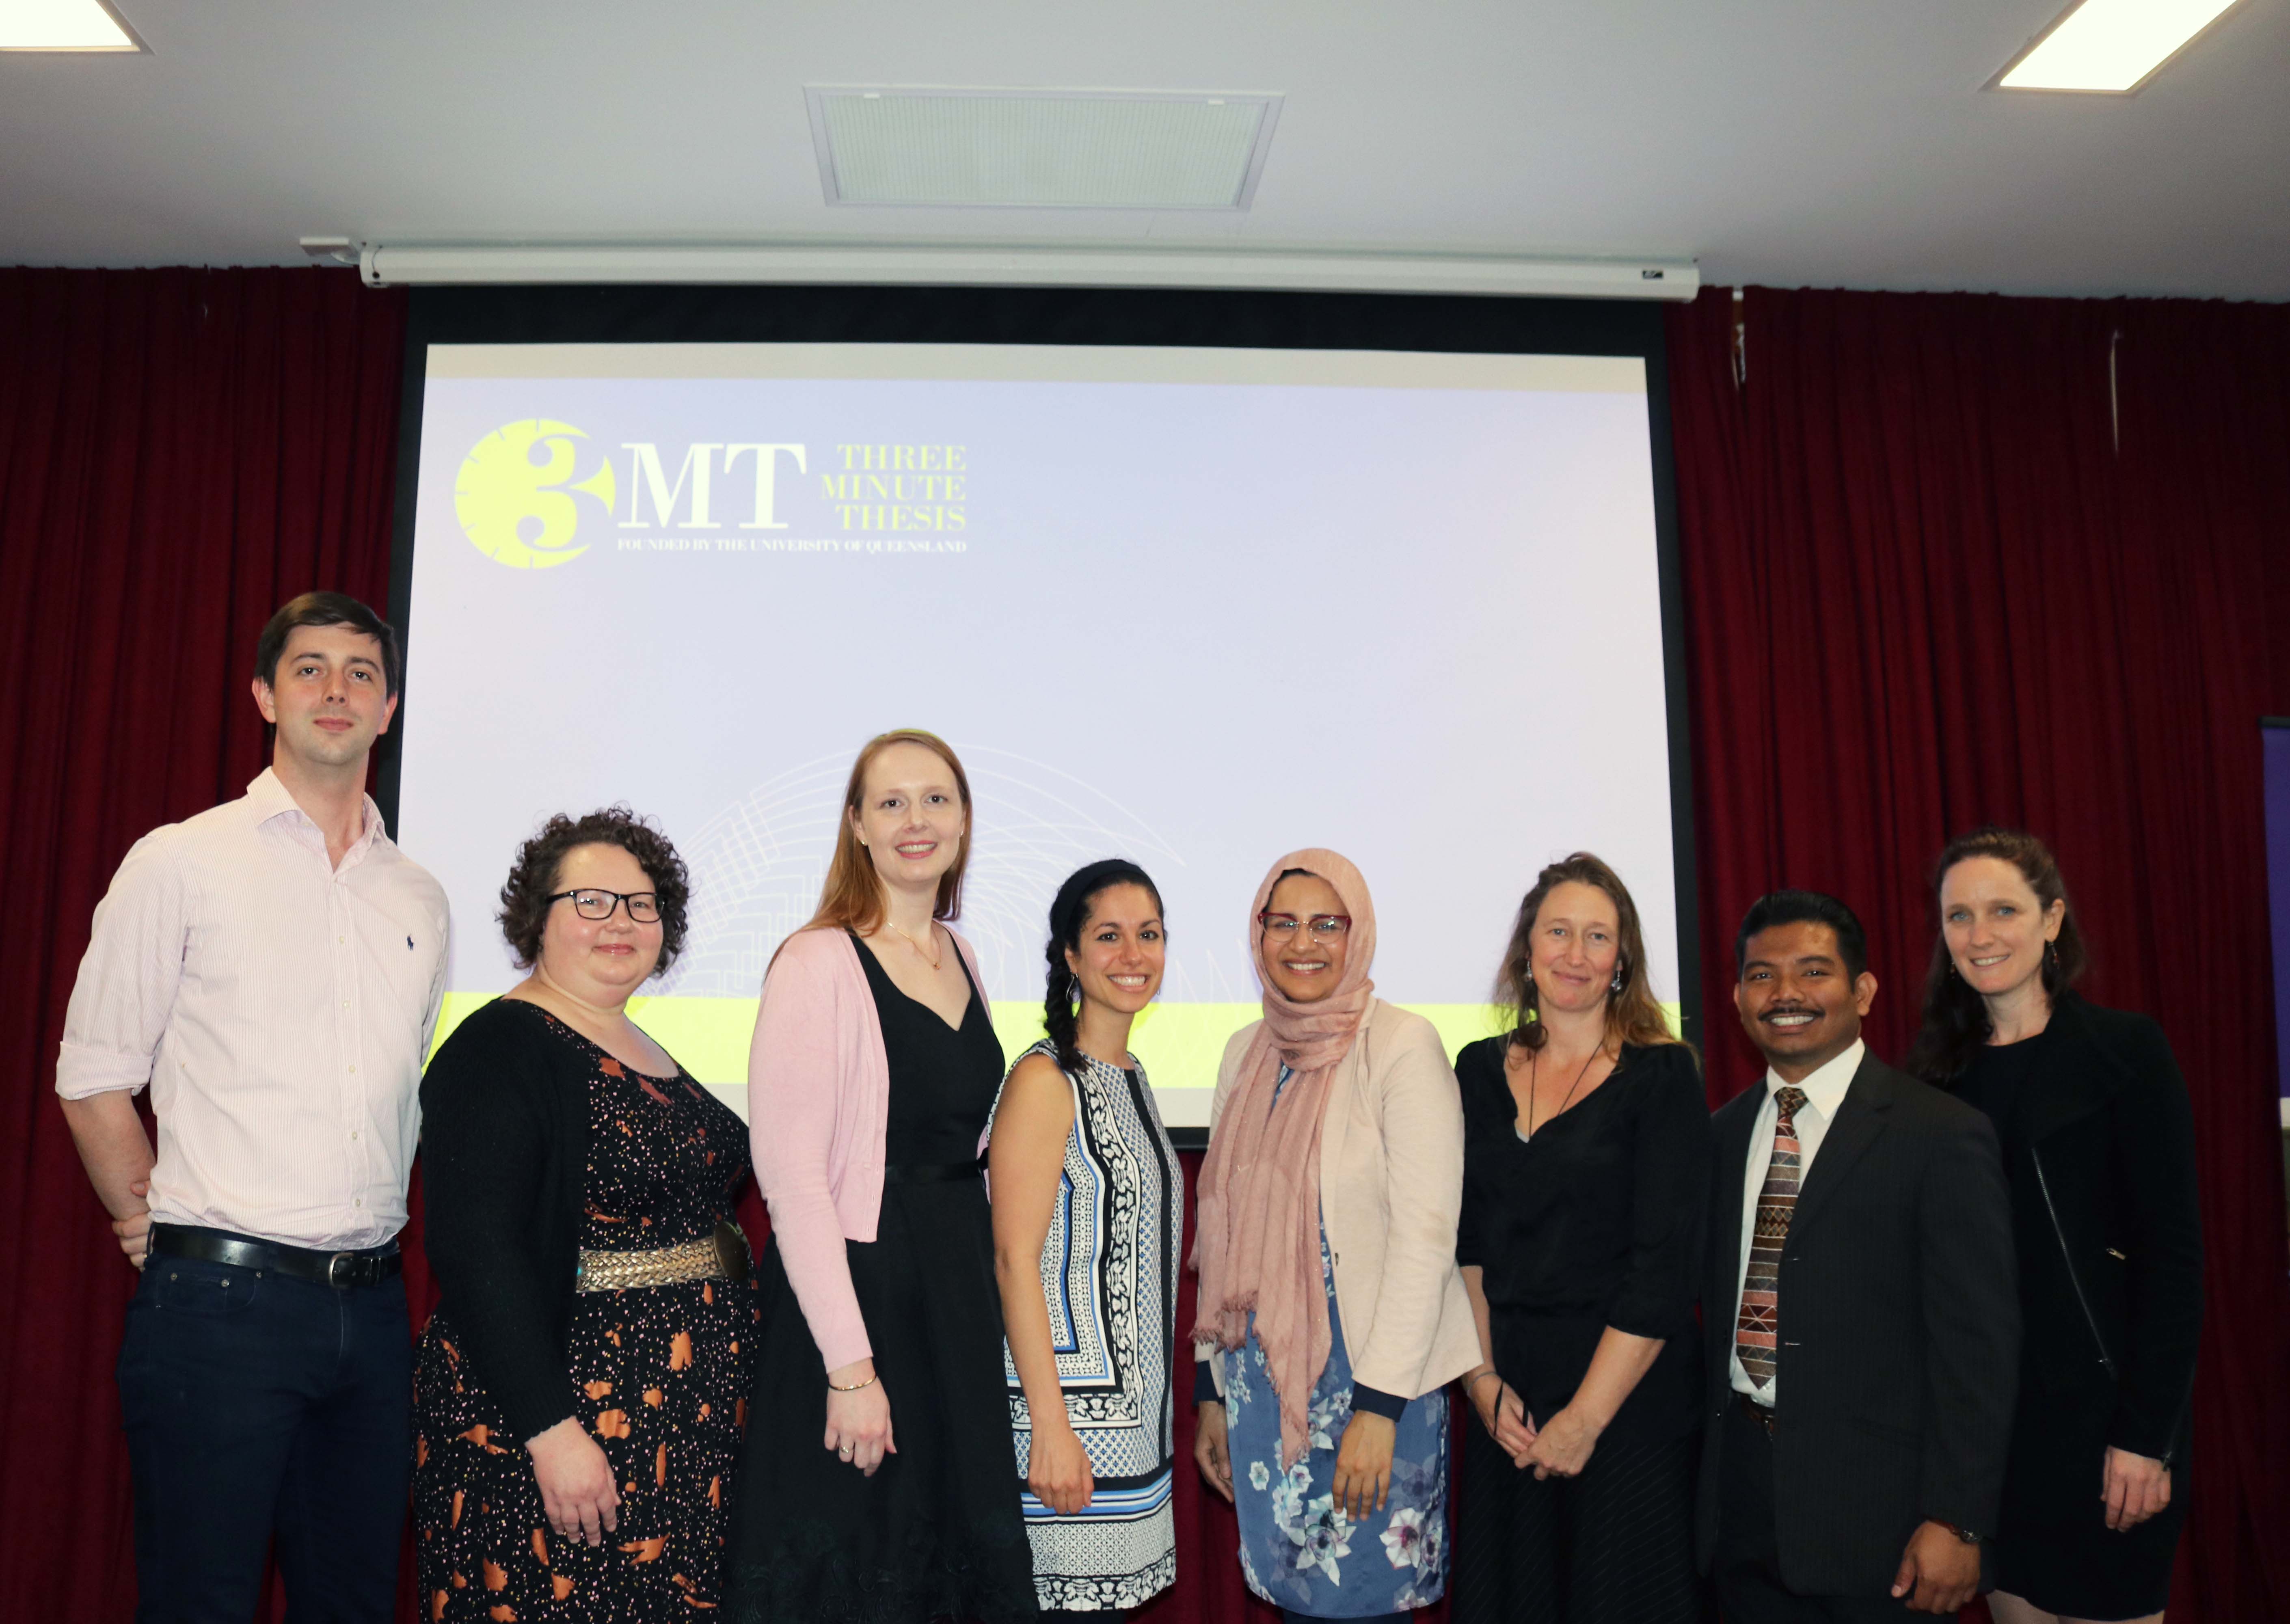 3 minute thesis queensland